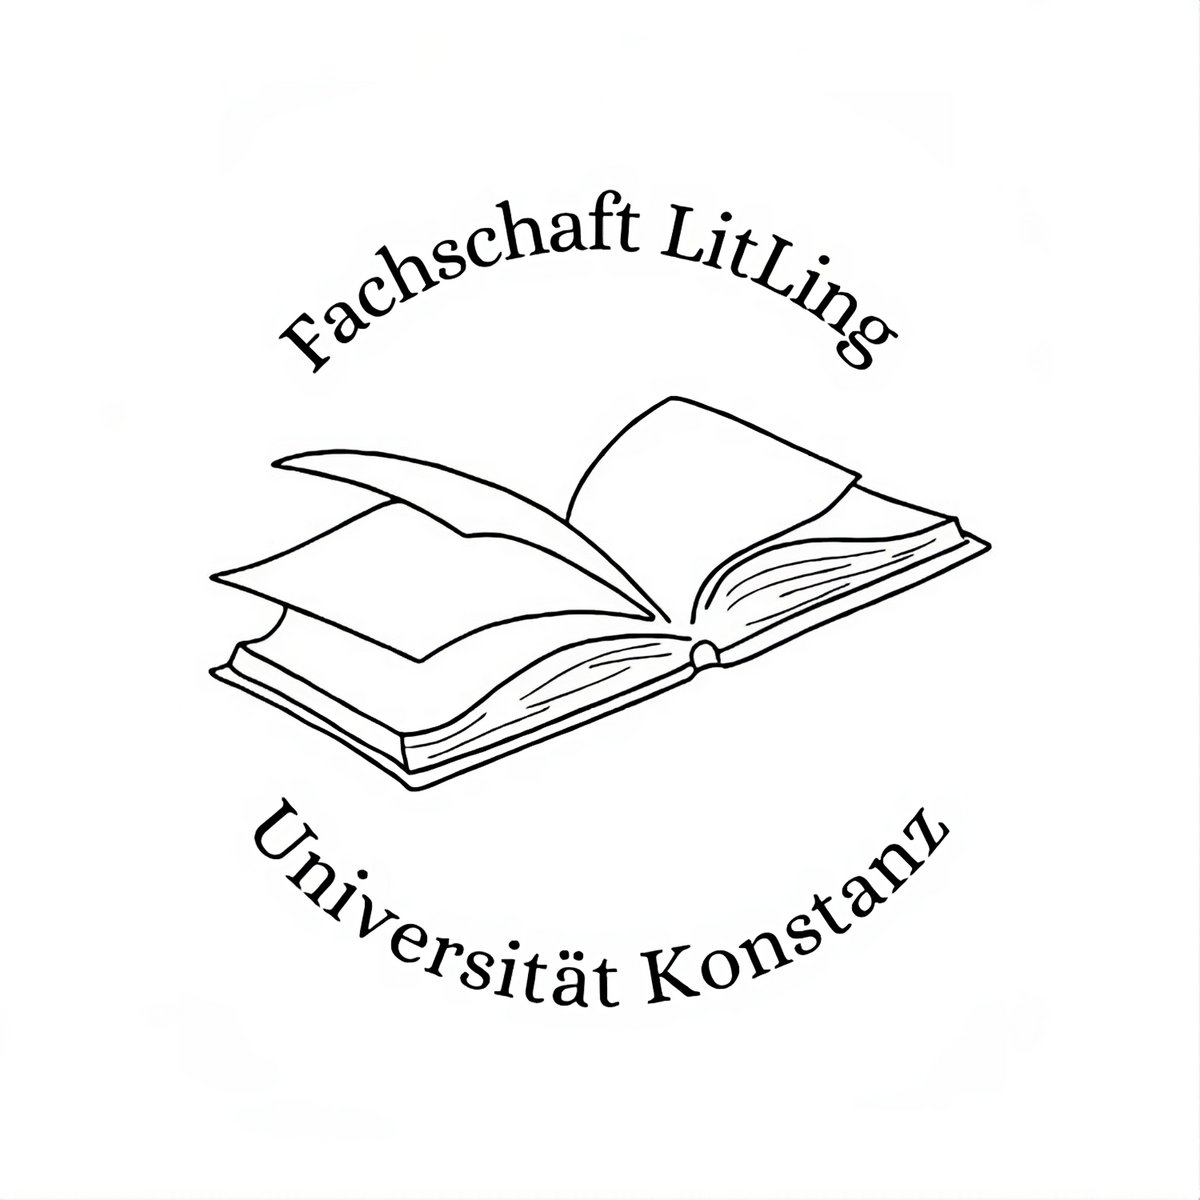 Logo of the LitLing Student Council: A drawing of an open book in the middle, above the words "Fachschaft LitLing" and below the words "Universität Konstanz".